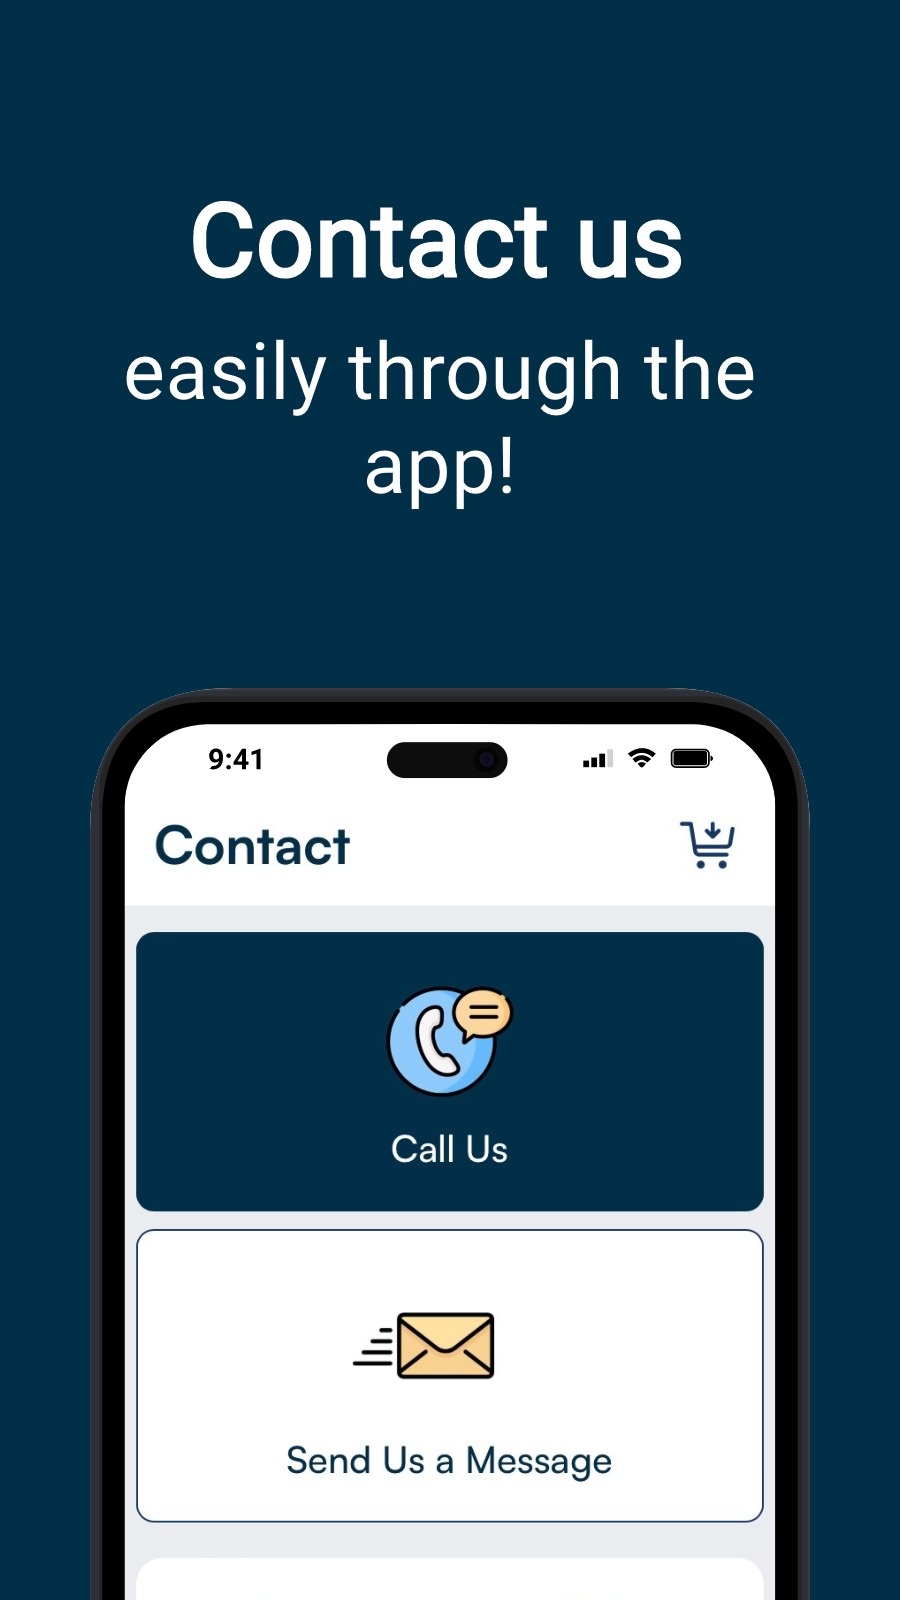 Contact us - easily through the app!